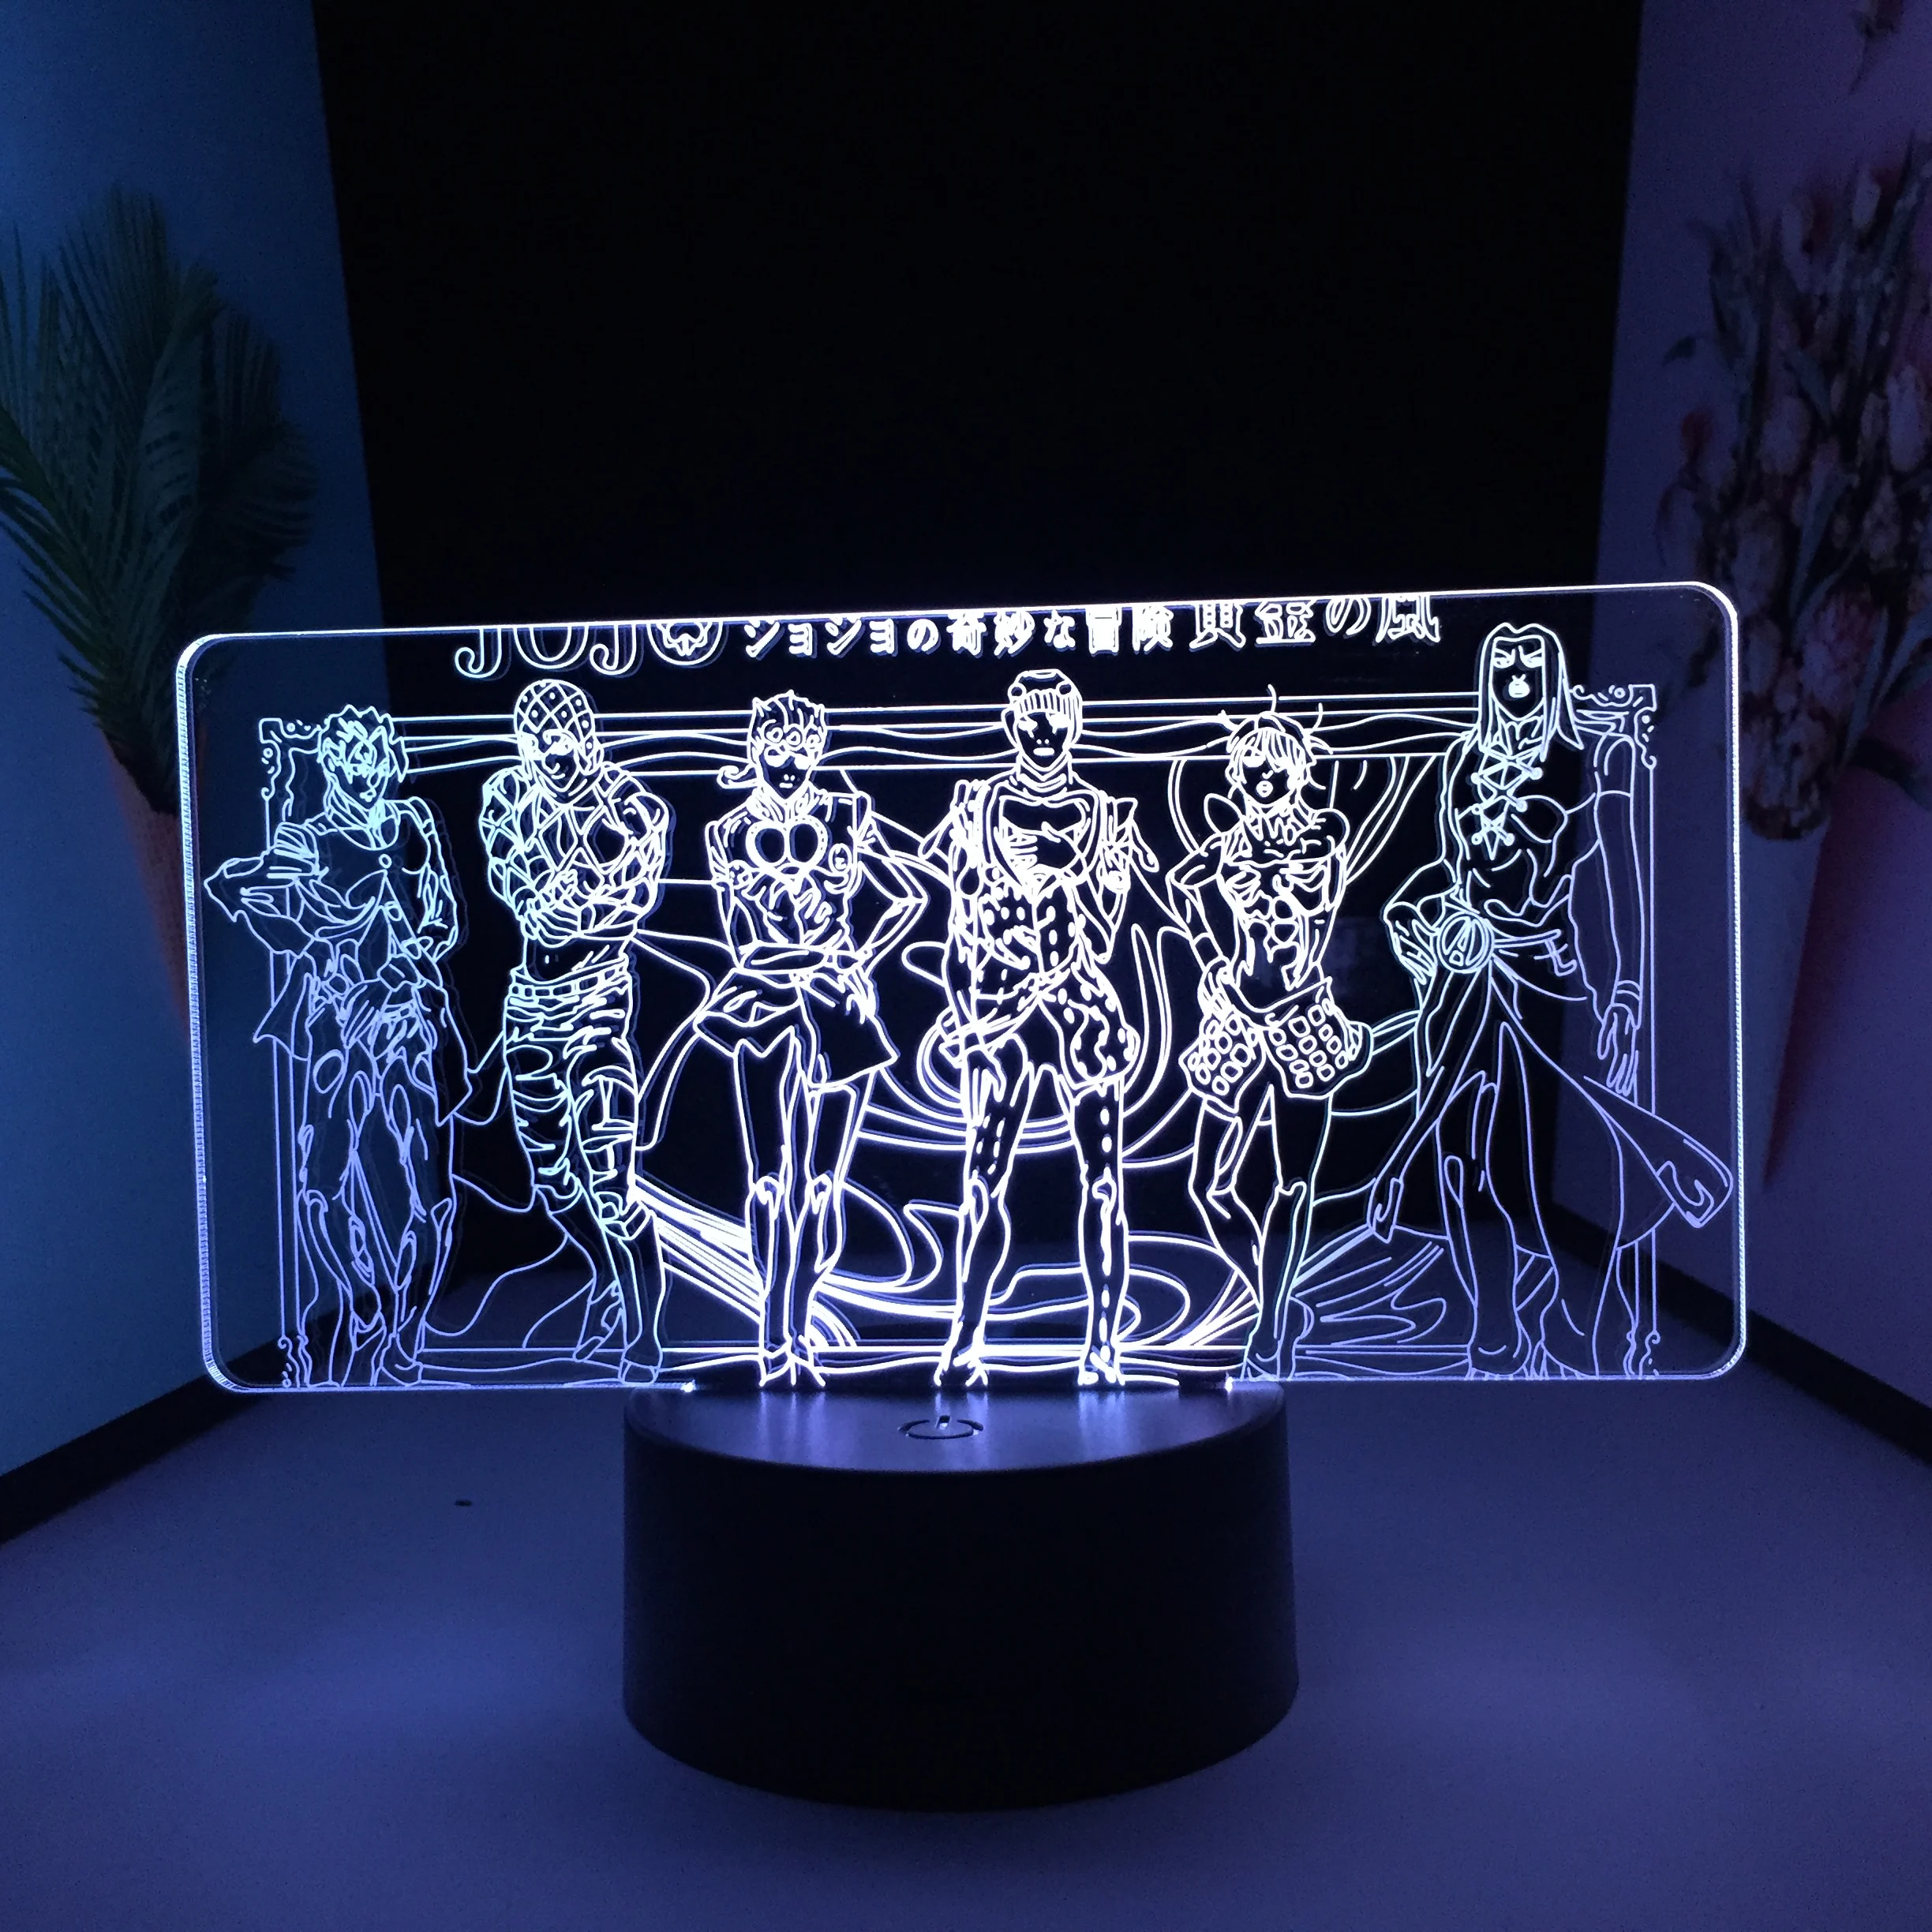 

Japanese Anime Character Gathering 3D LED Lamp Visual Illusion Black Base USB Charging Home Decor for Festival Birthday Gifts